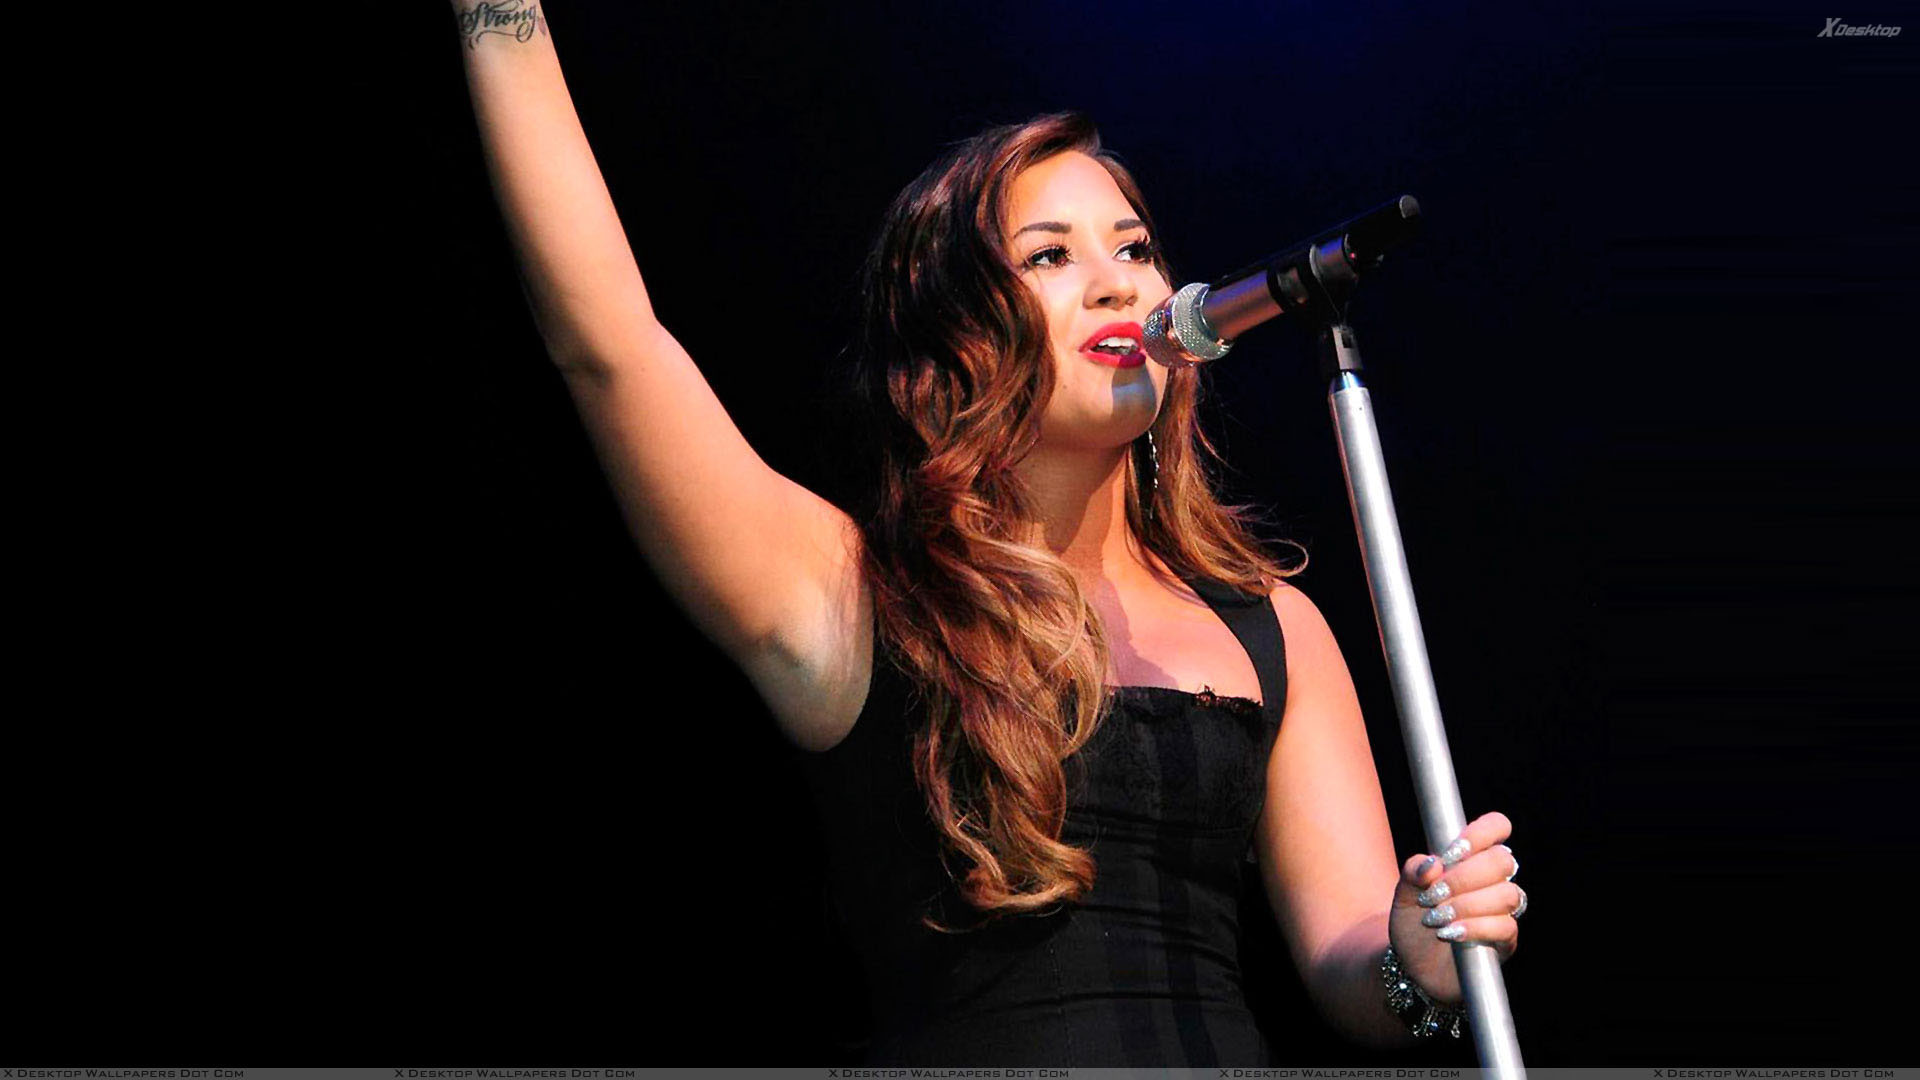 1920x1080 You are viewing wallpaper titled "Demi Lovato ...